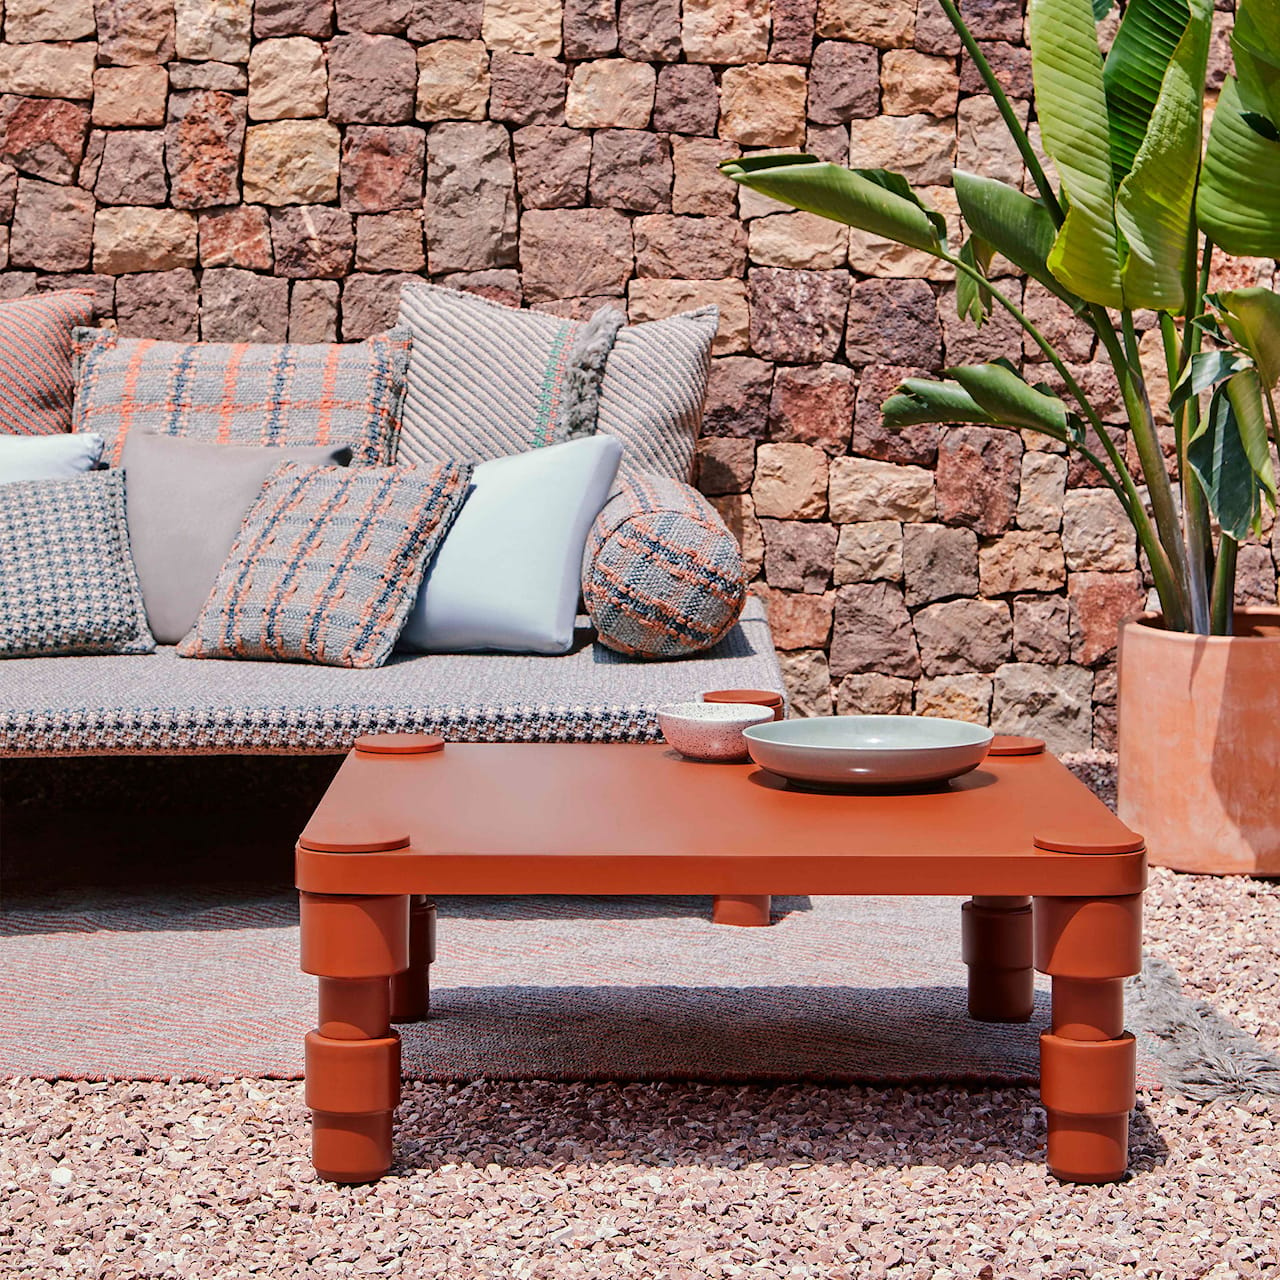 Garden Layers Single Indian Bed - Gofre Terracotta